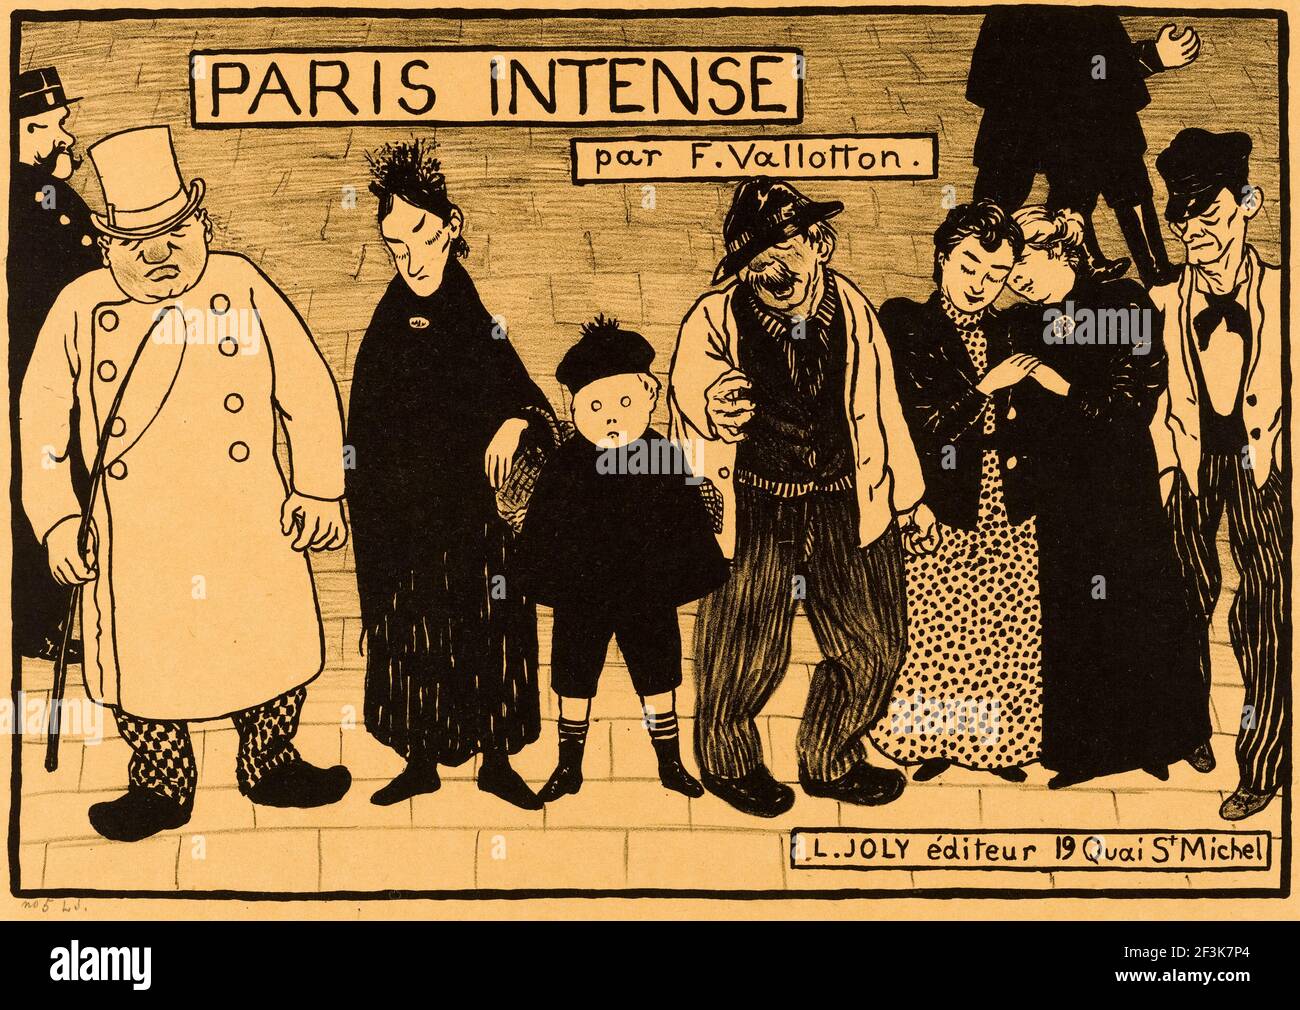 Félix Vallotton, Cover or Frontispiece for 'Paris Intense', lithographic print, 1894 Stock Photo